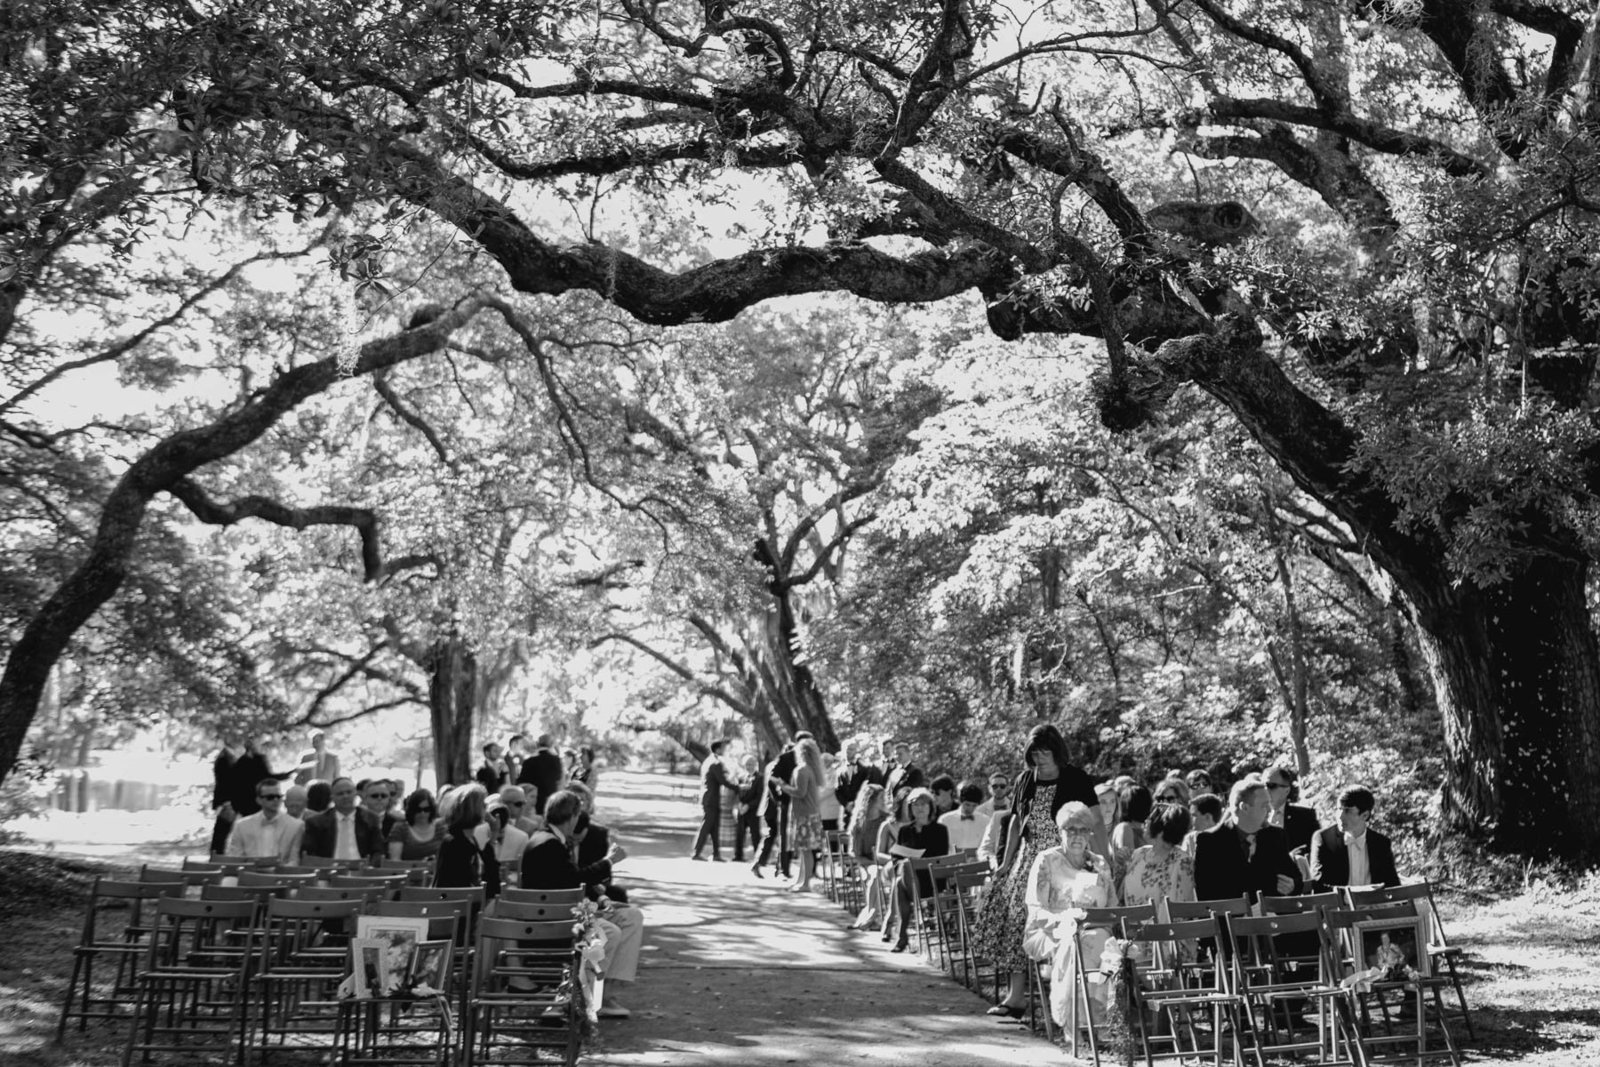 Guests get seated for ceremony, Brookgreen Gardens, Murrells Inlet, South Carolina